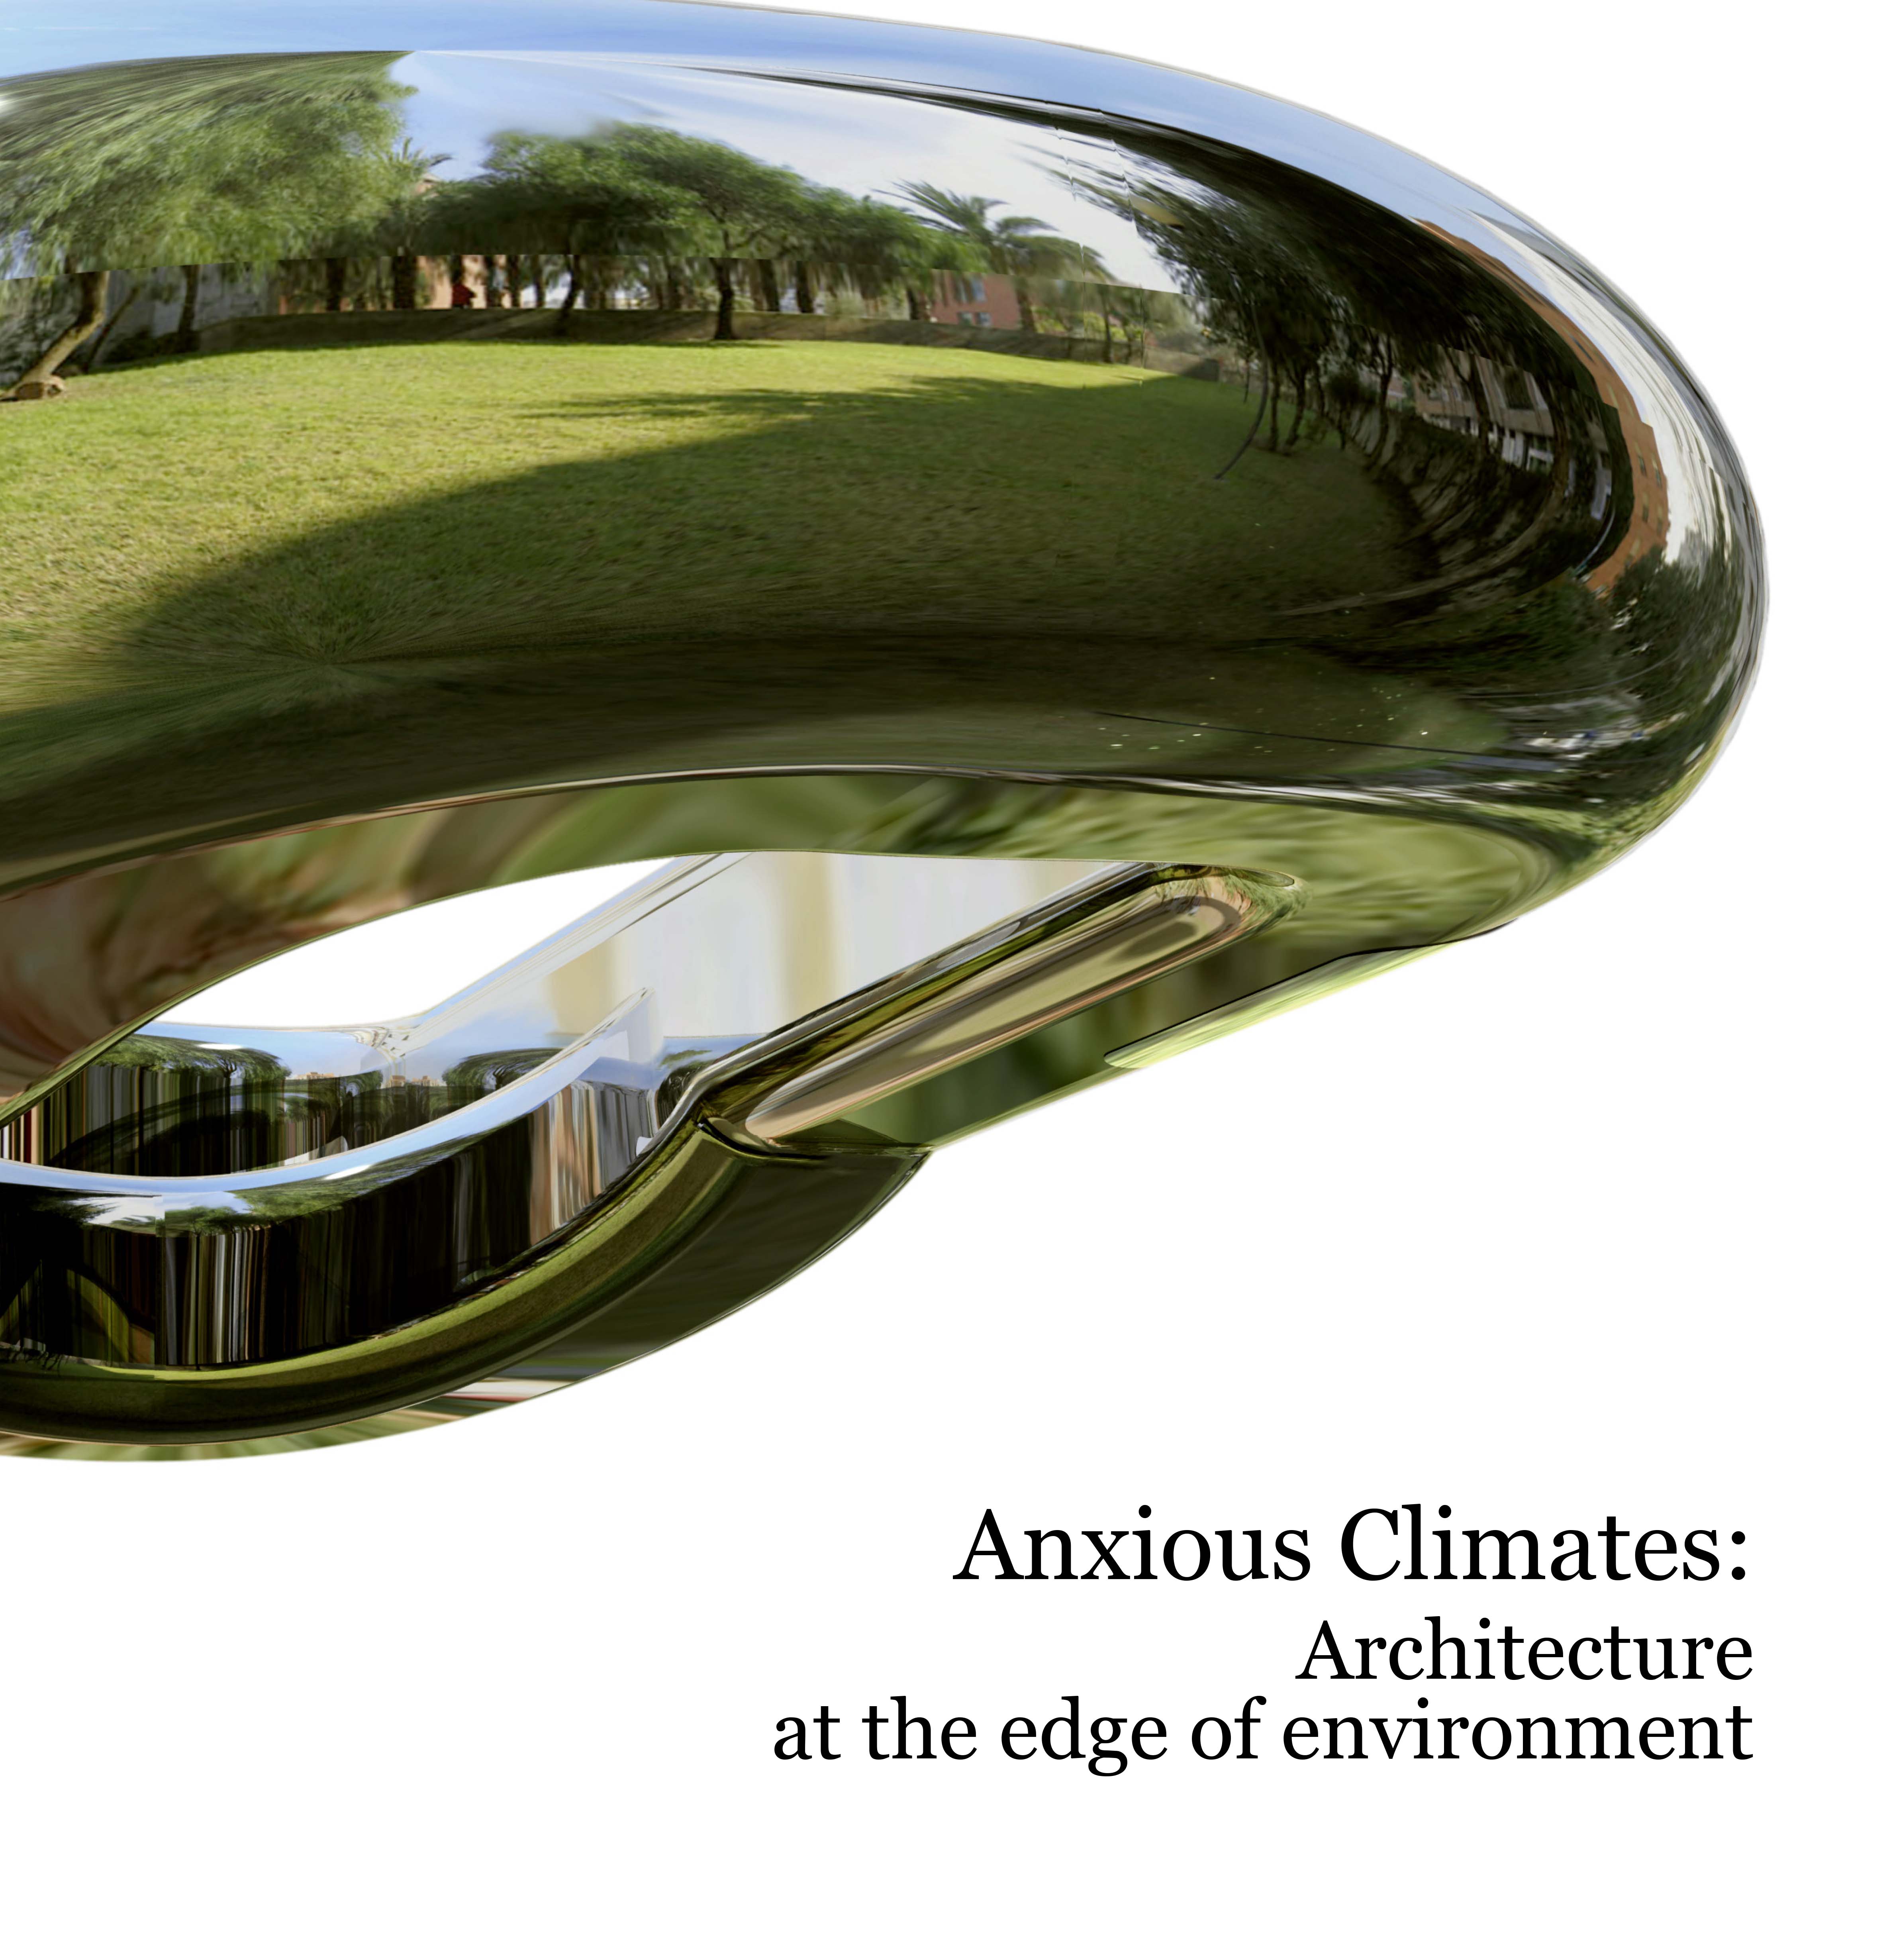 Anxious Climates: Architecture at the edge of environment